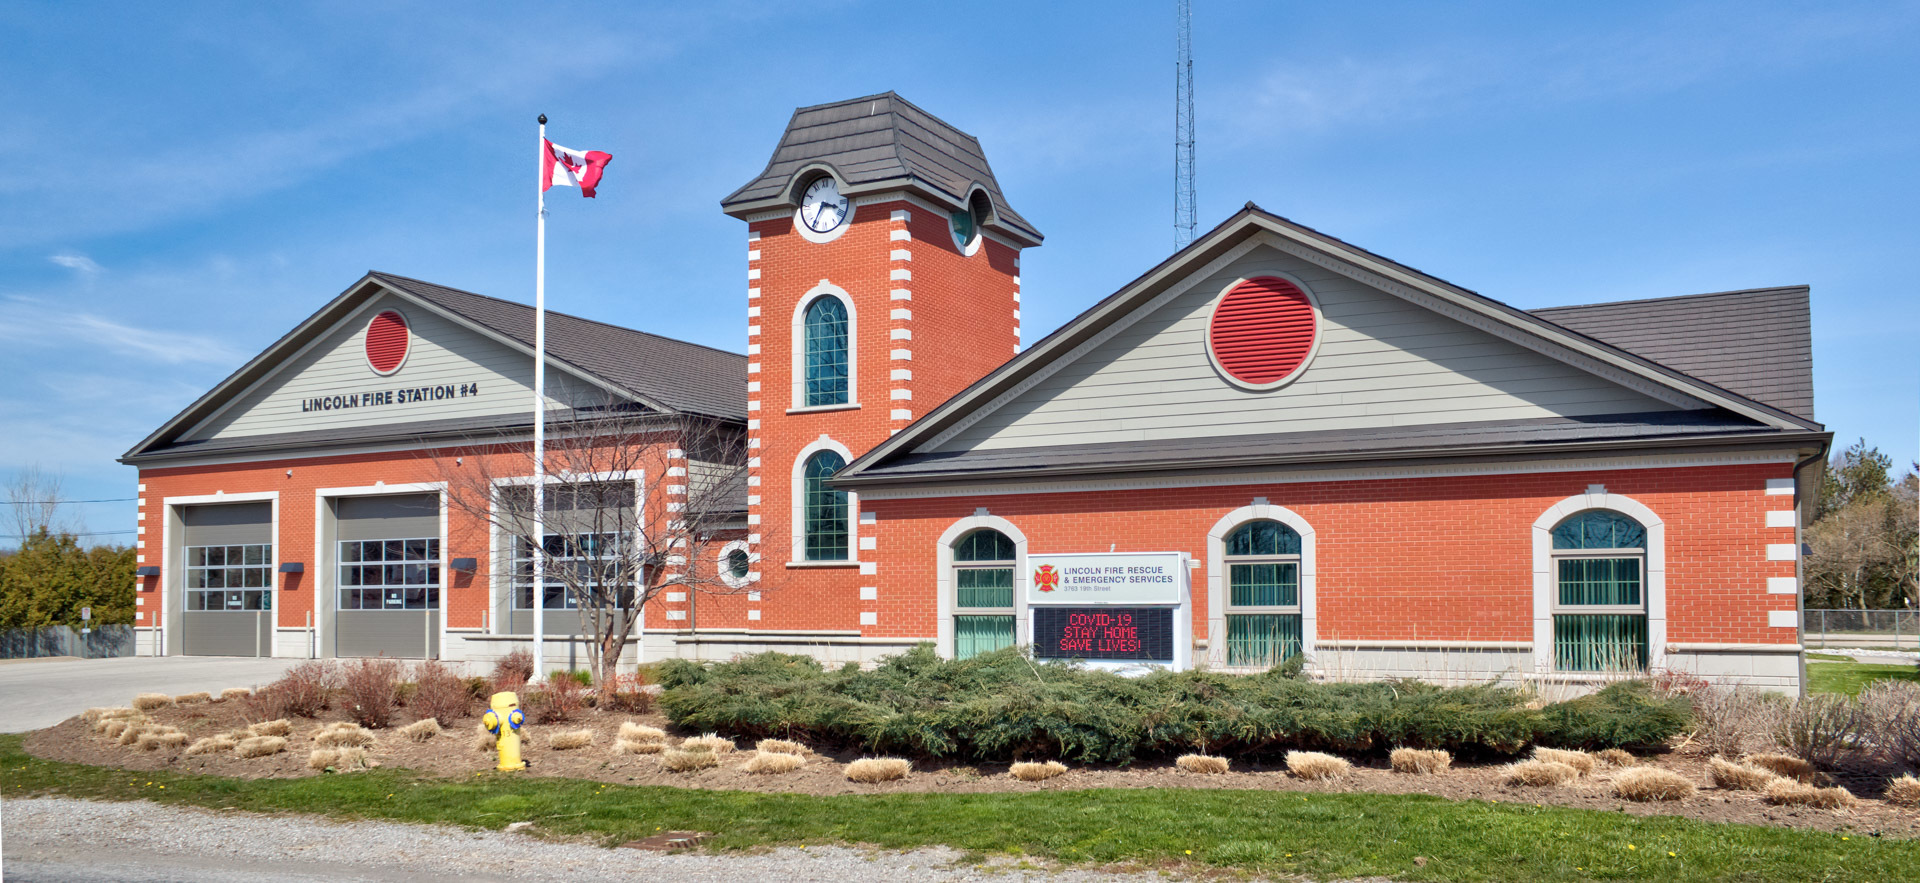 Lincoln Fire Station No. 4